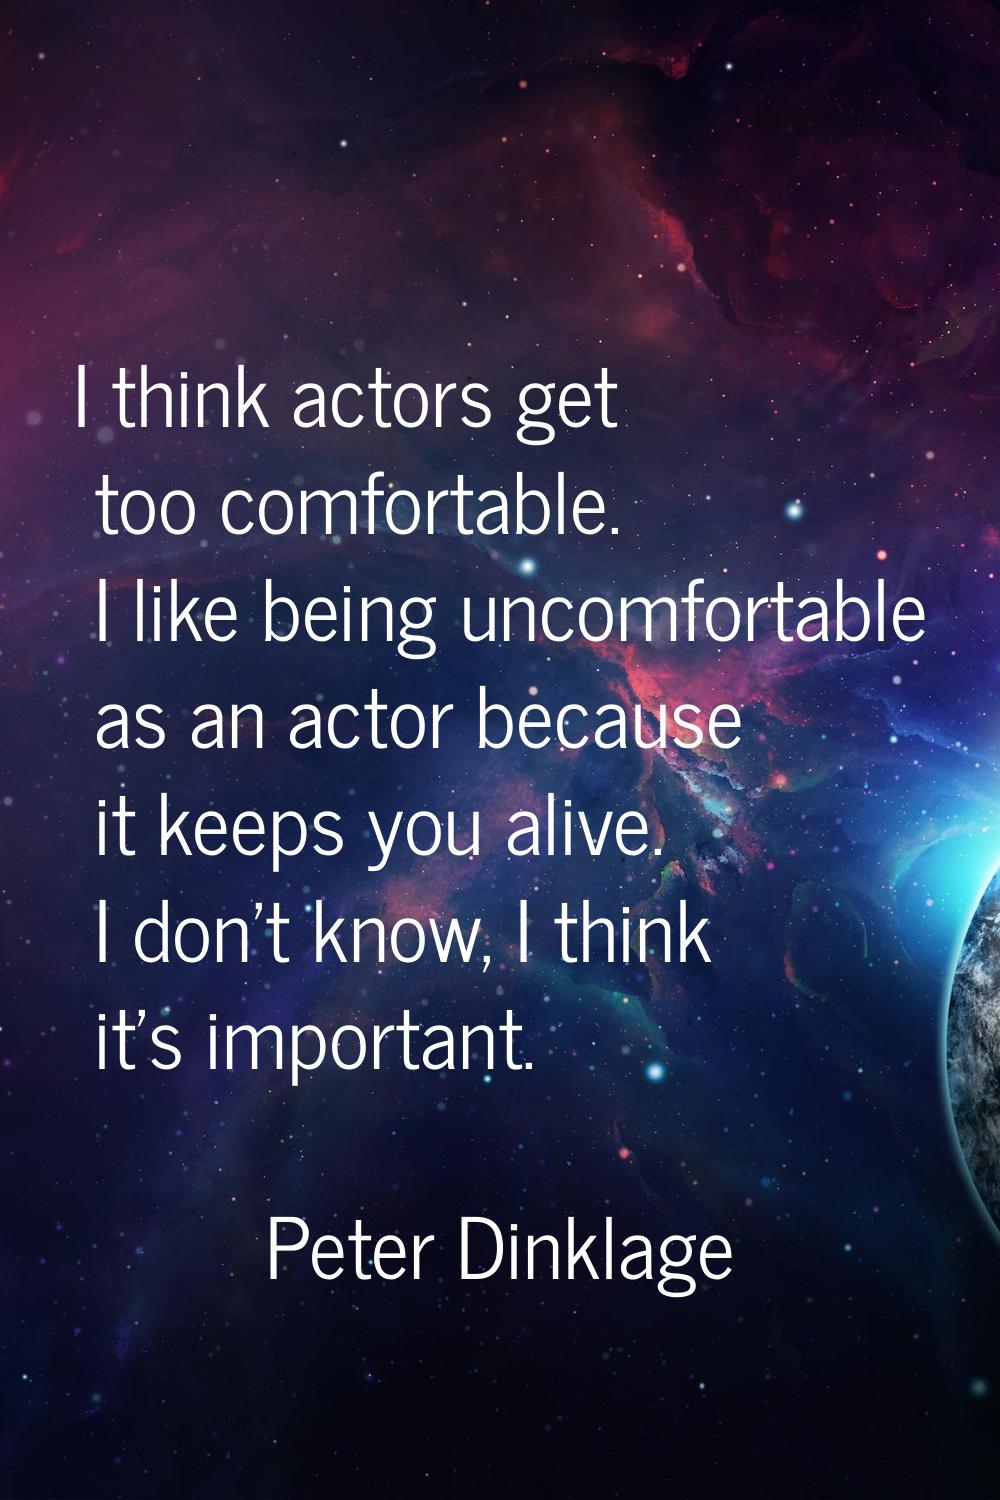 I think actors get too comfortable. I like being uncomfortable as an actor because it keeps you ali